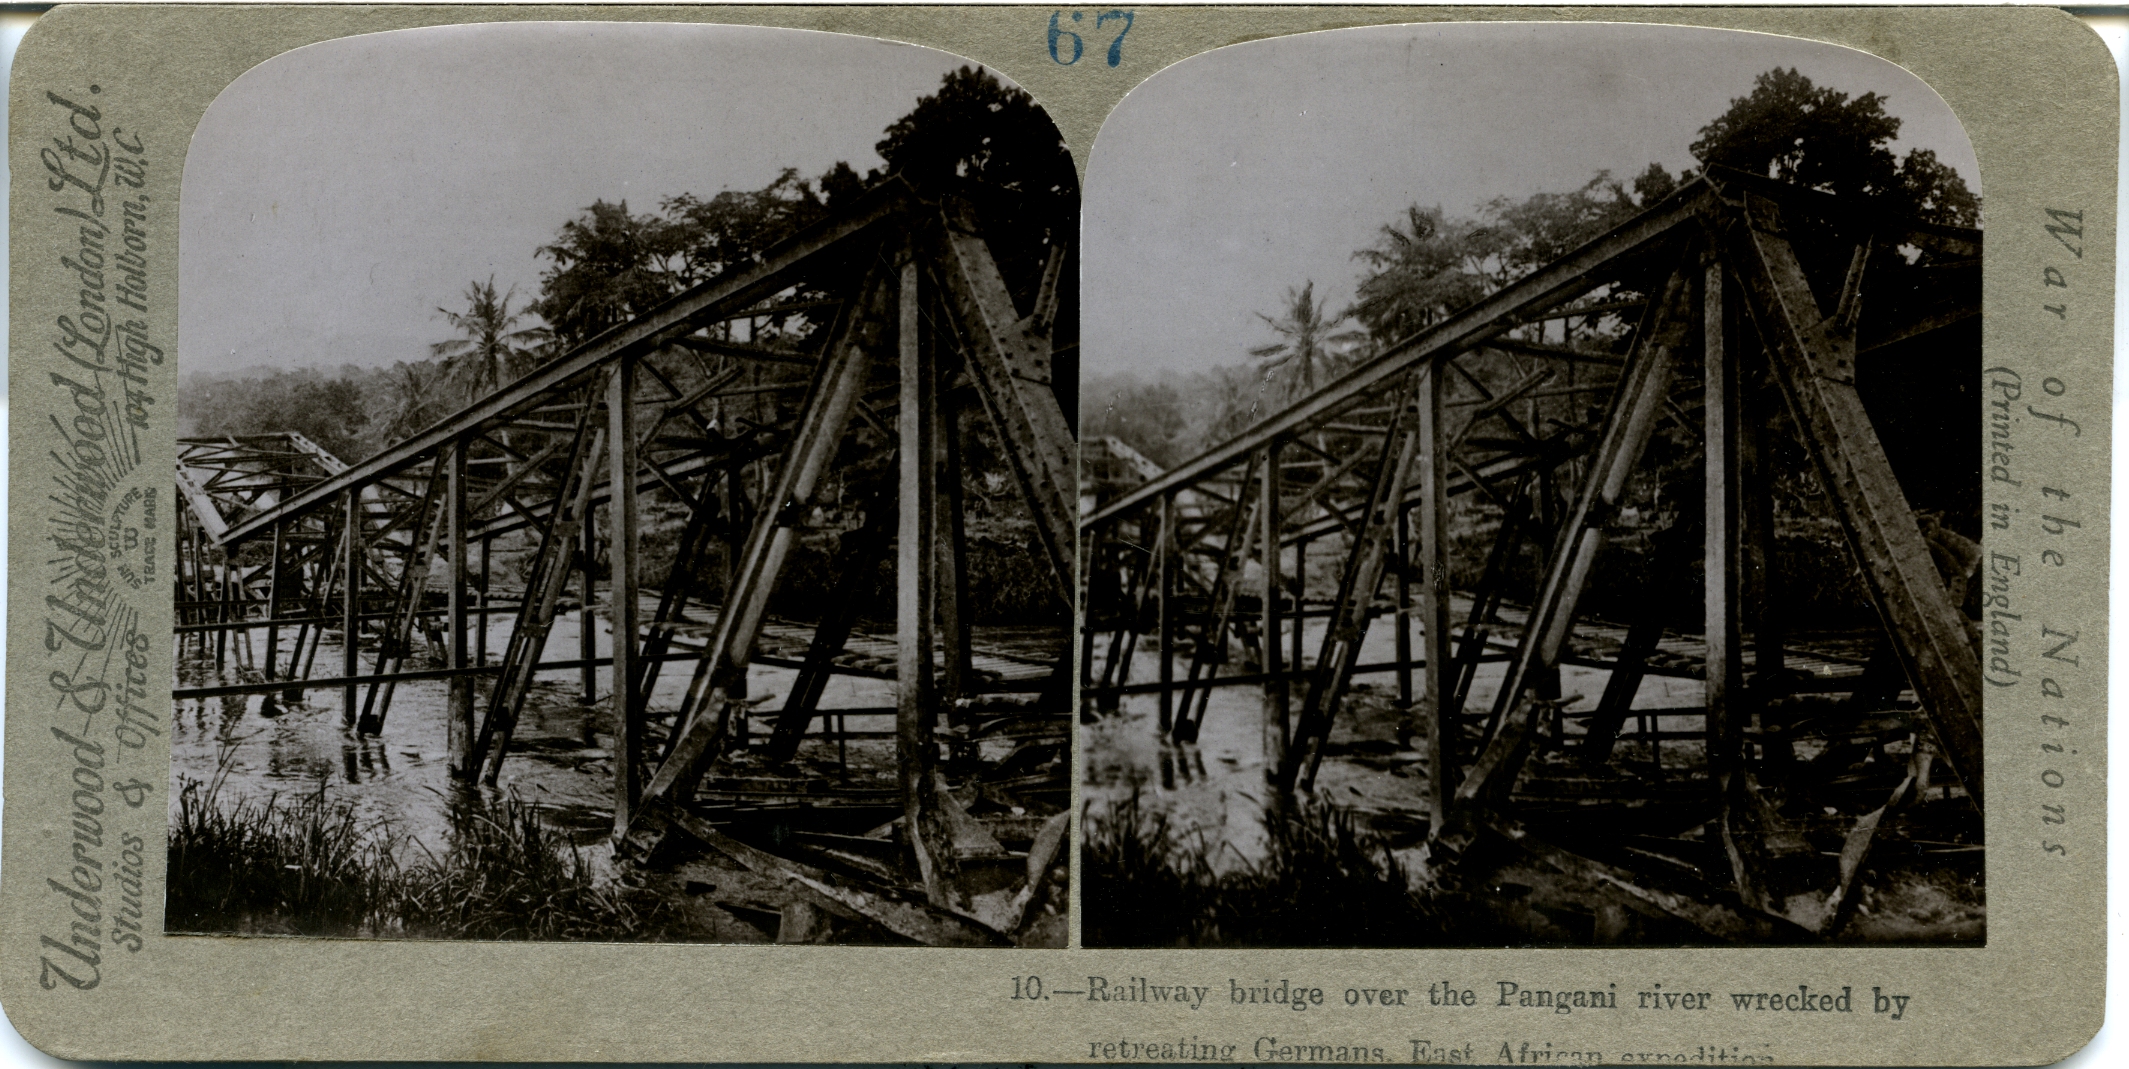 Railway bridge over the Pangani river wrecked by retreating Germans, East African Expedition